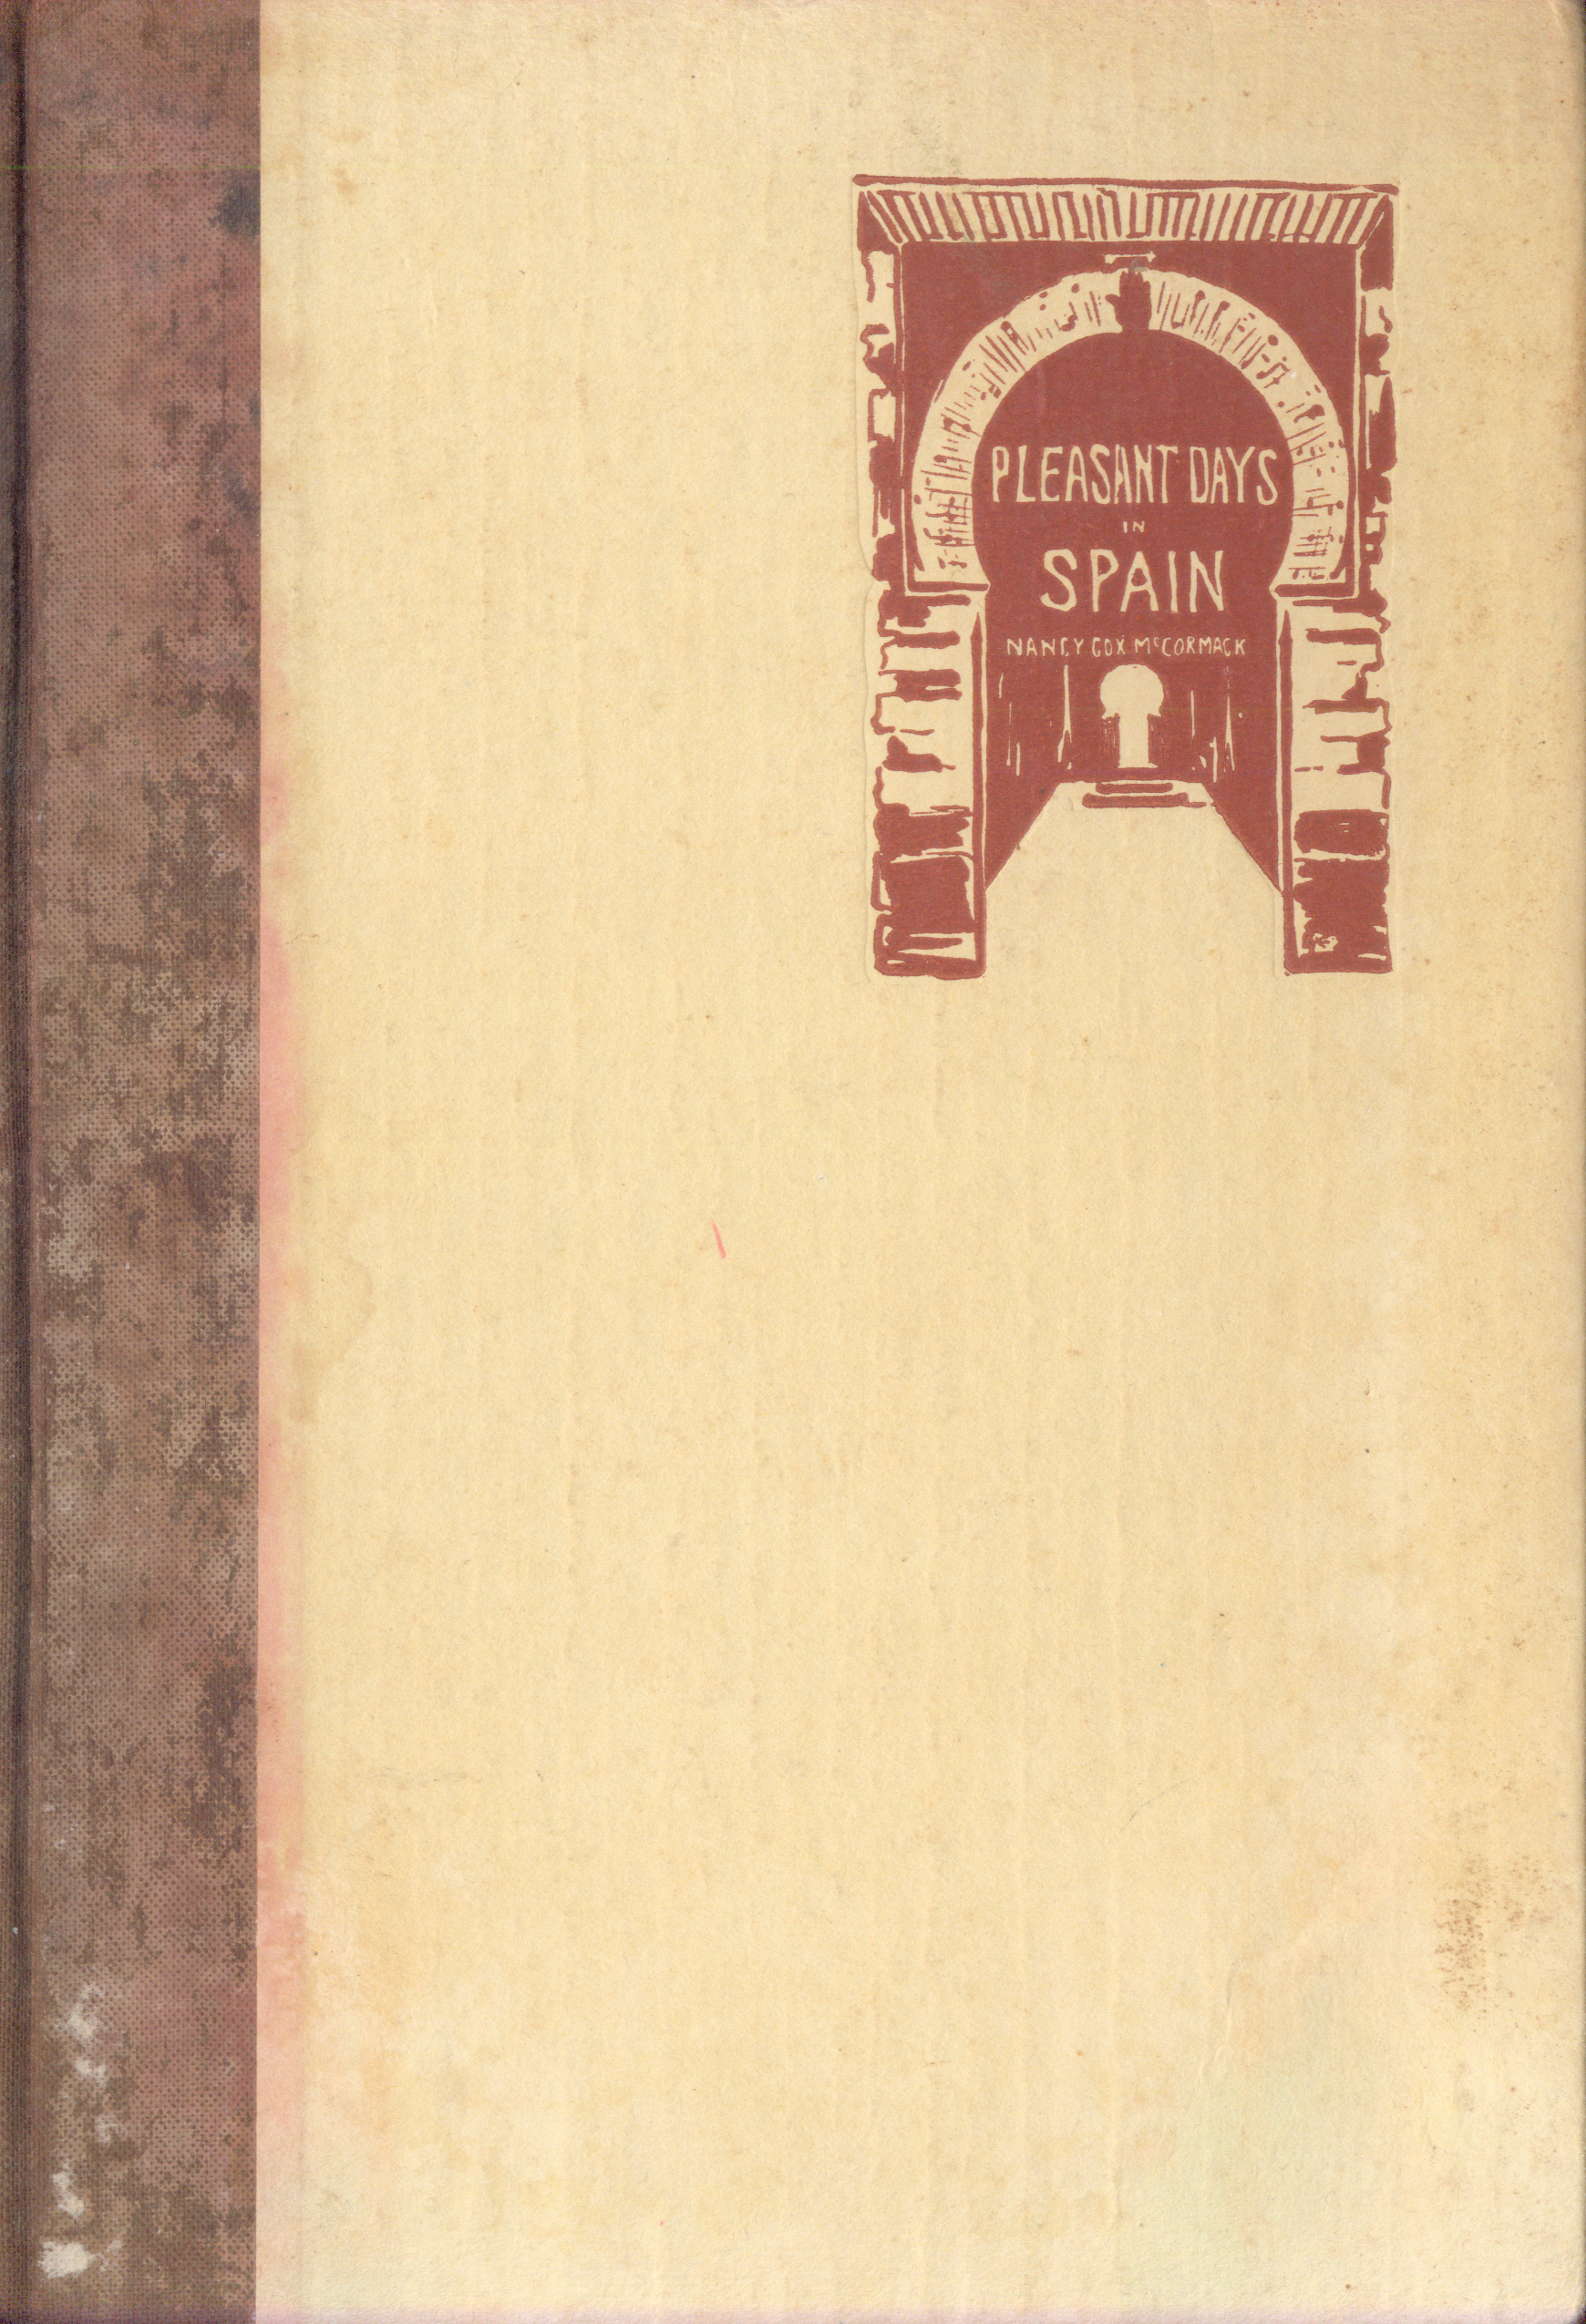 cover of book, small illustration of archway